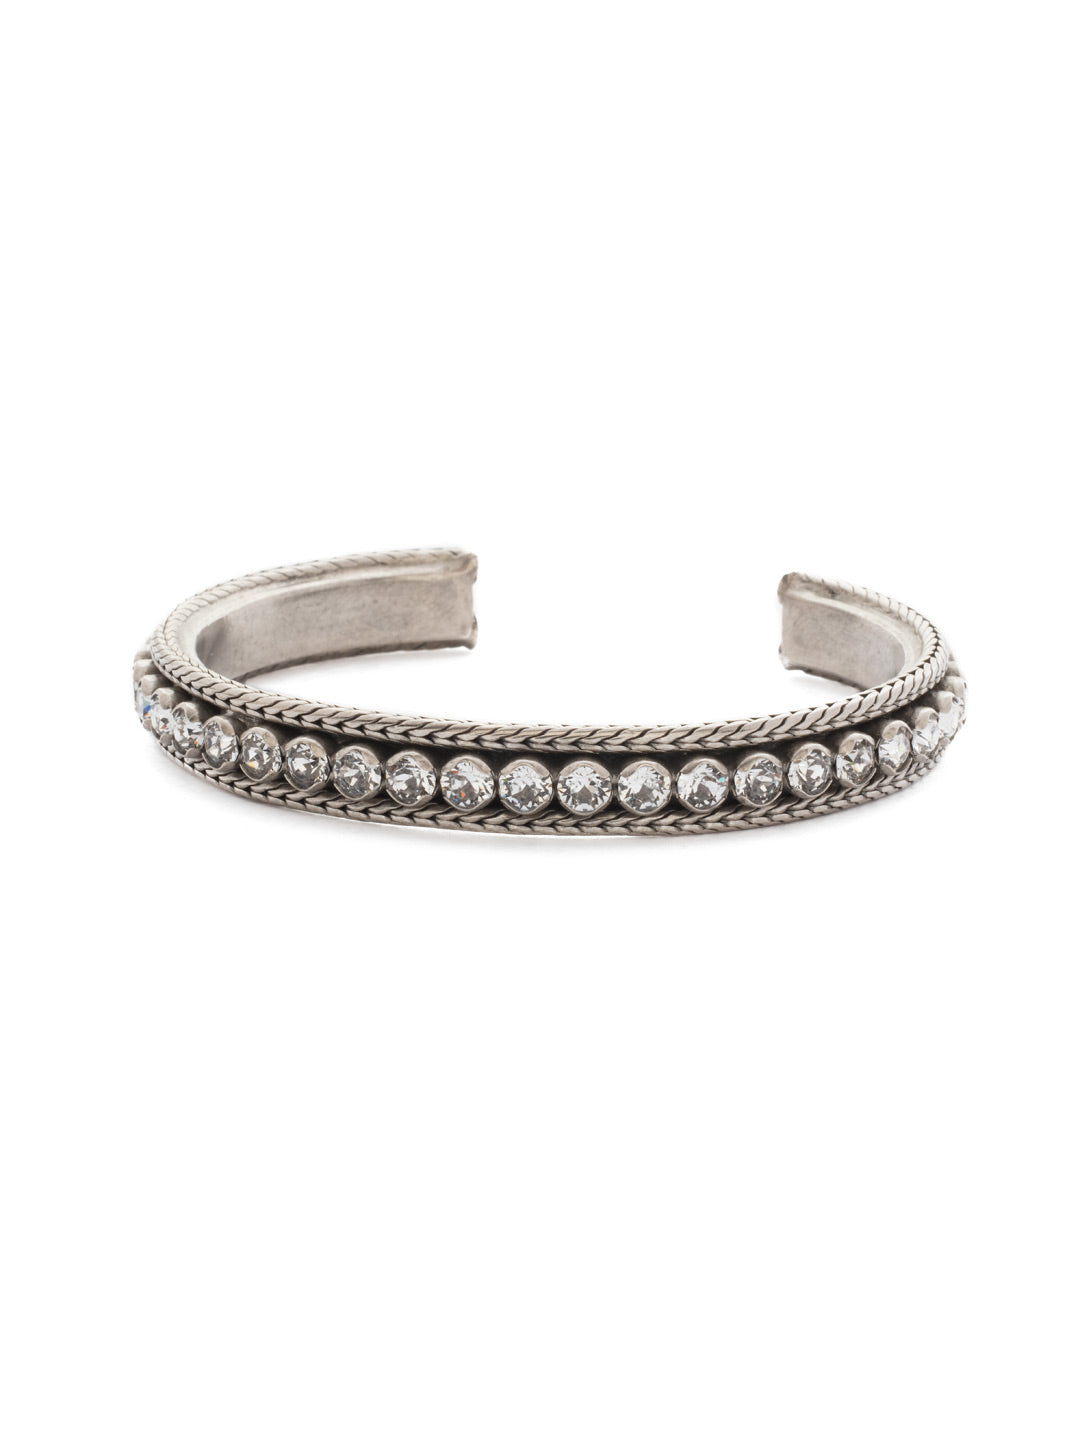 Channeling Chic Cuff Bracelet - BDM6ASCRY